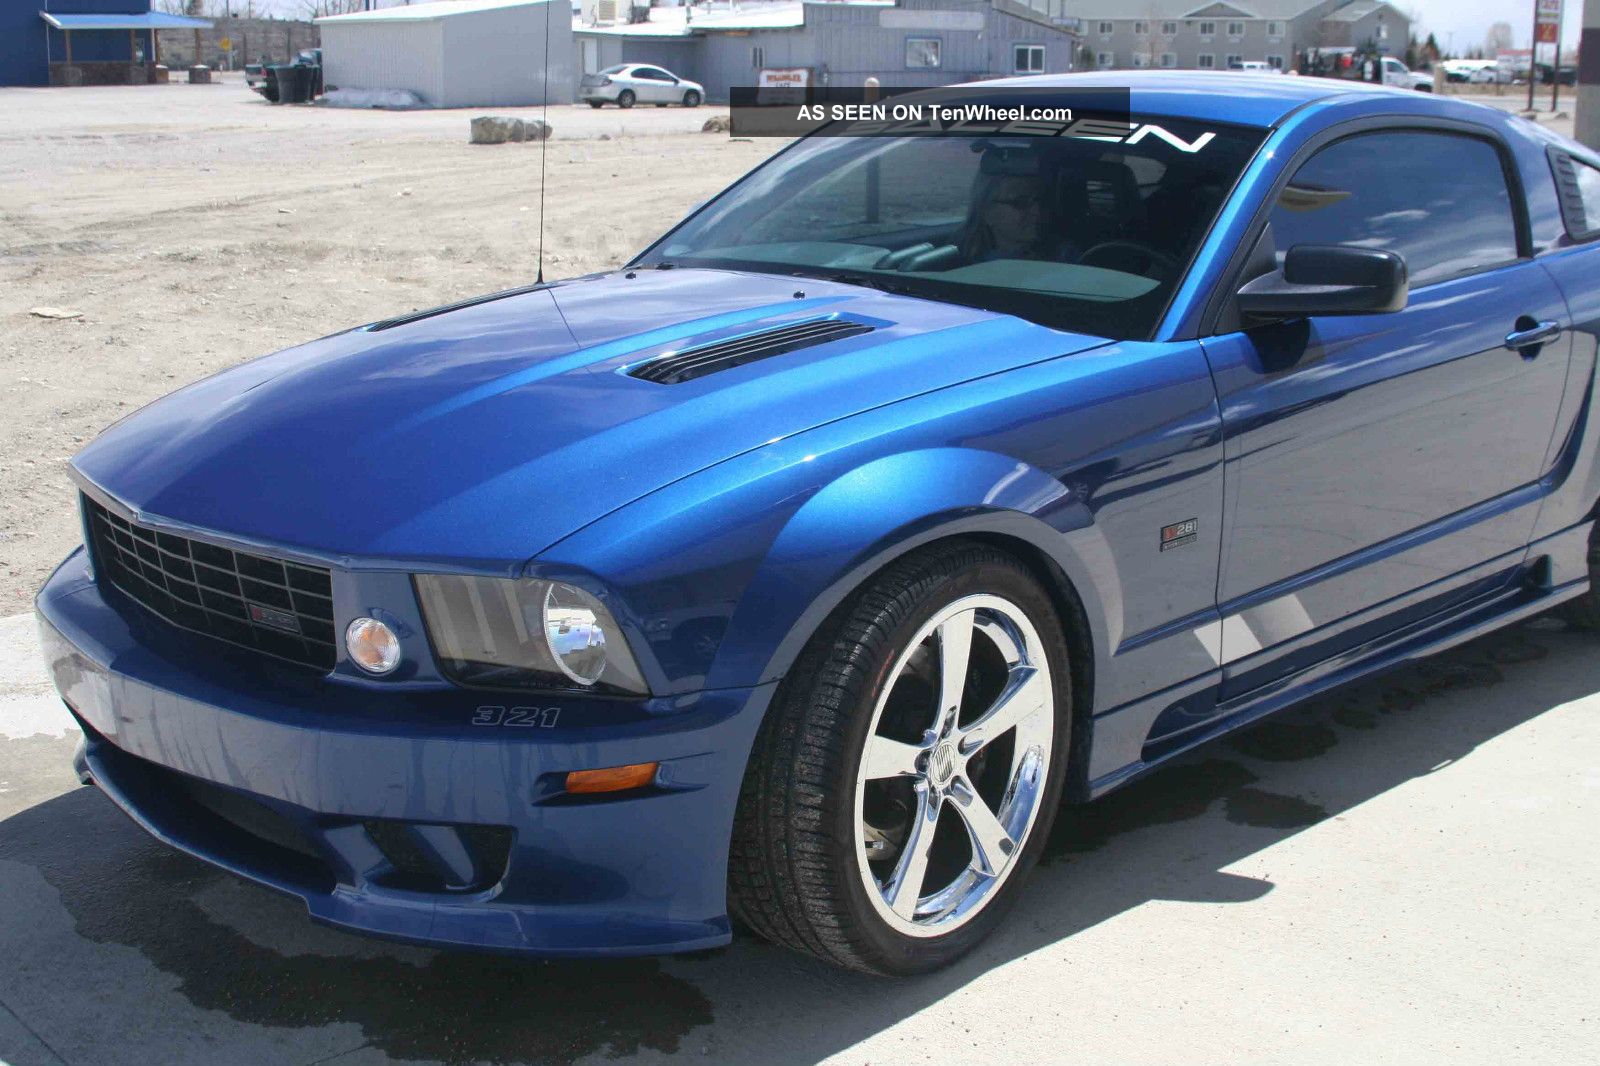 2007 Ford mustang saleen s281 specs #3